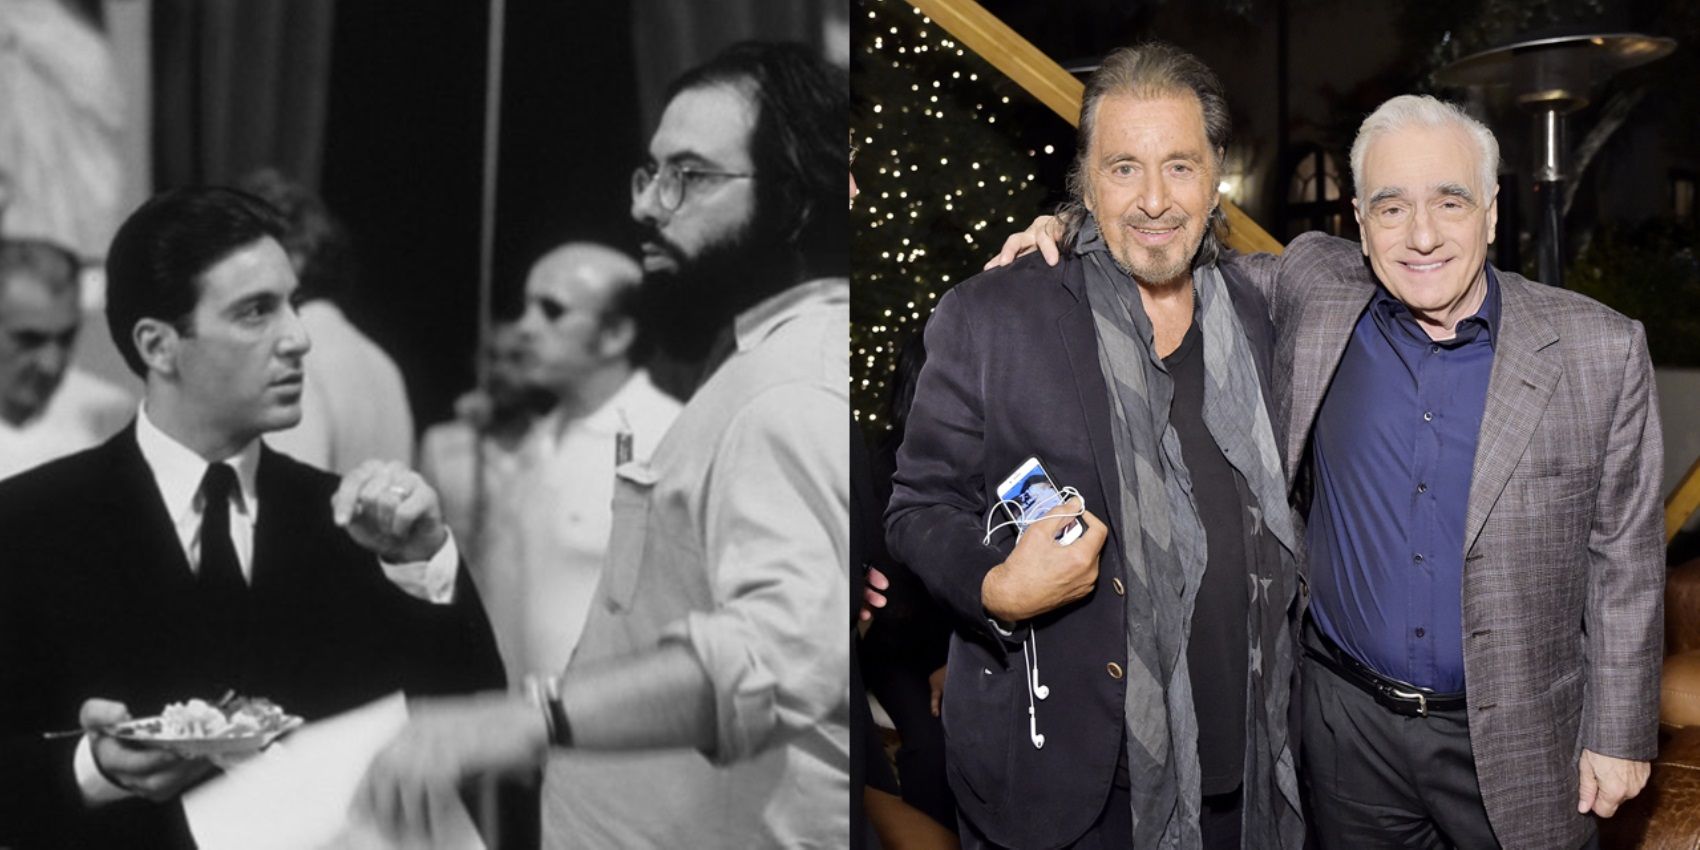 Split image of Al Pacino working on The Godfather and standing with Martin Scorsese at a red carpet event